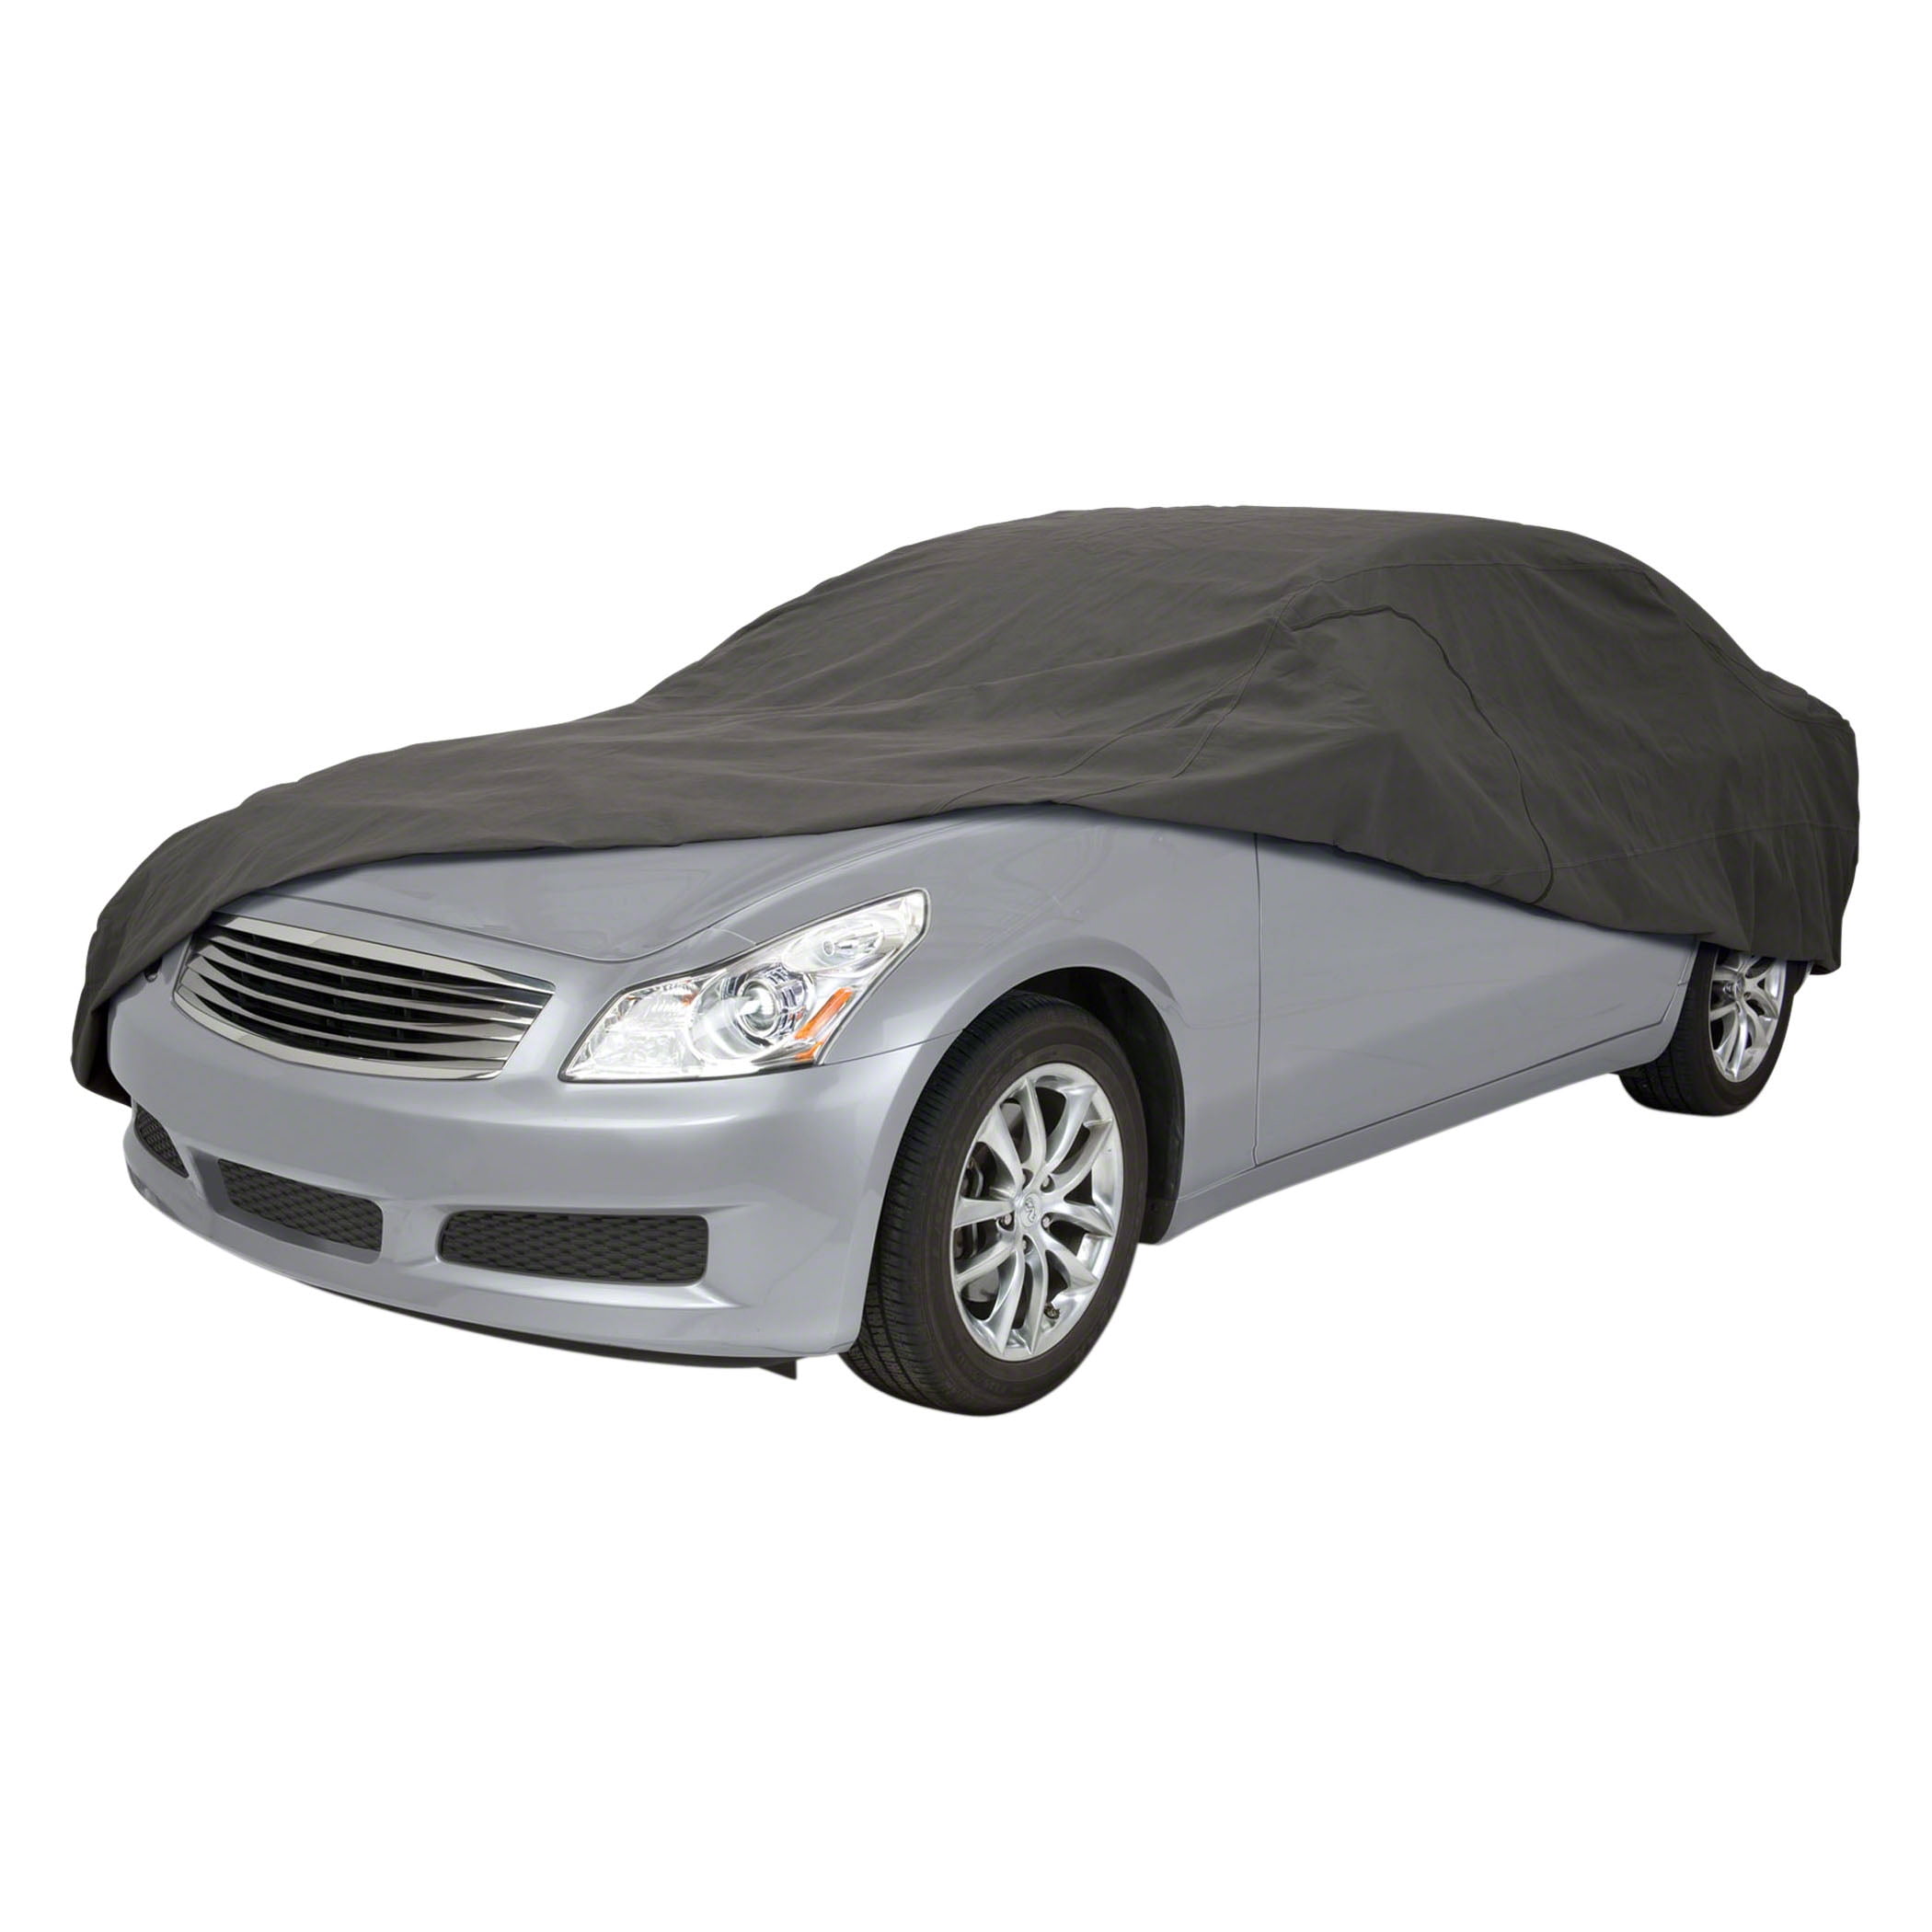 10-103-011001-RT Classic Accessories Over Drive PolyPRO3 Sedan Car Cover 12'6L 